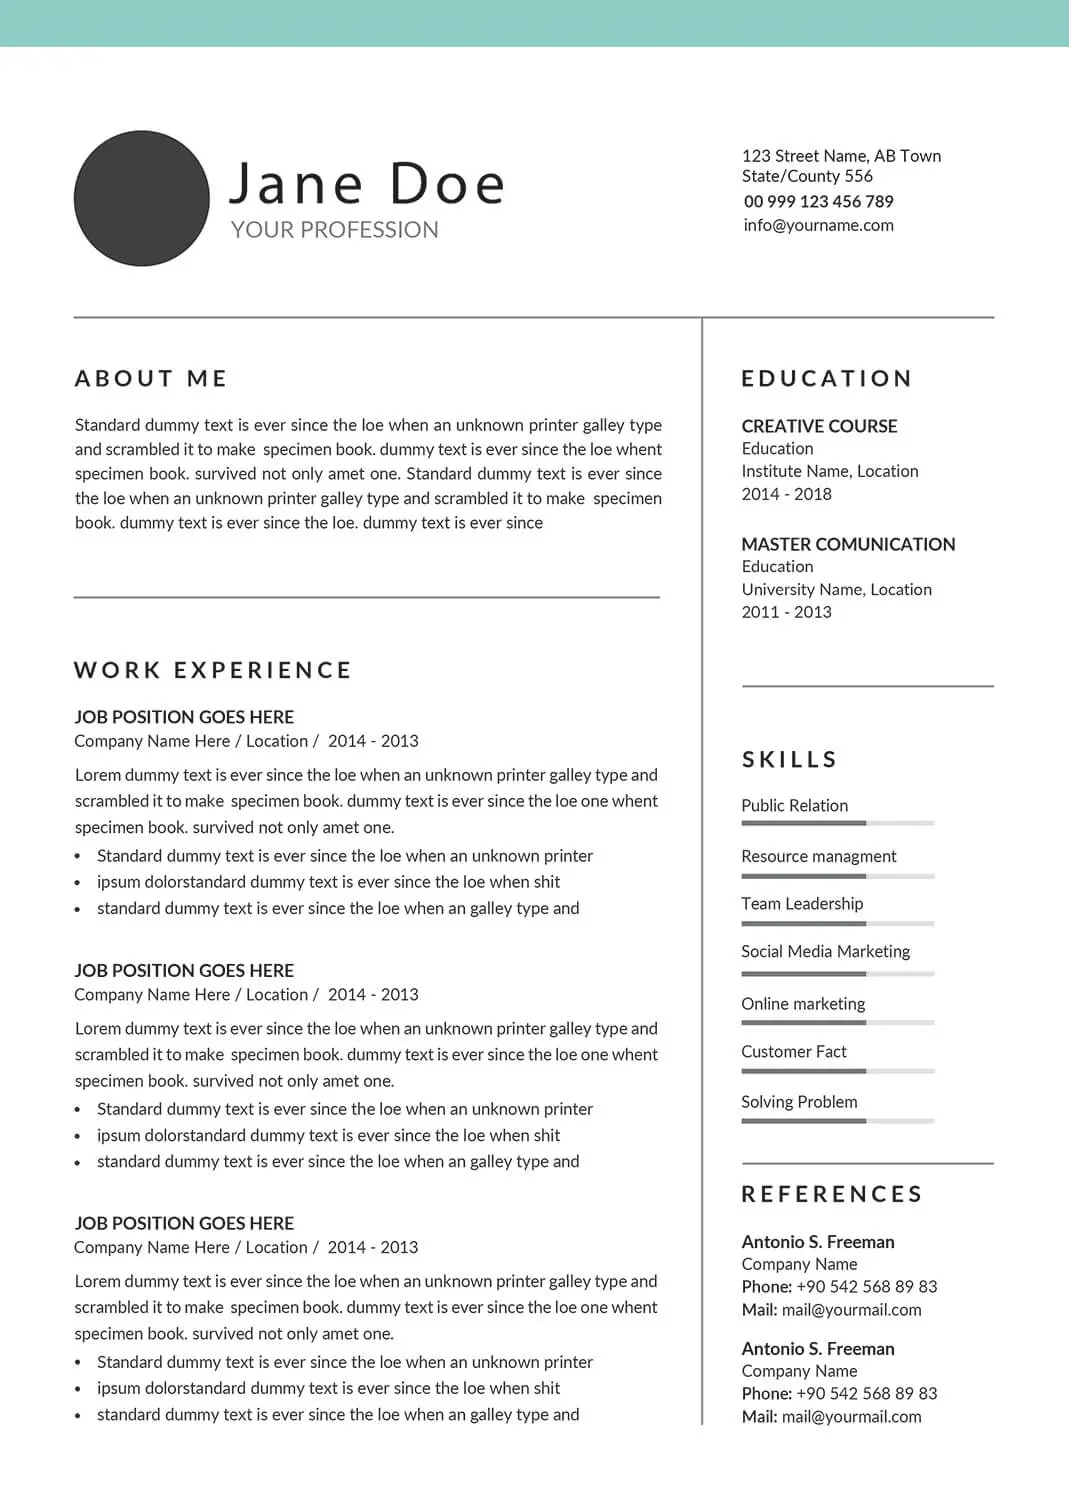 cyber-security-resume